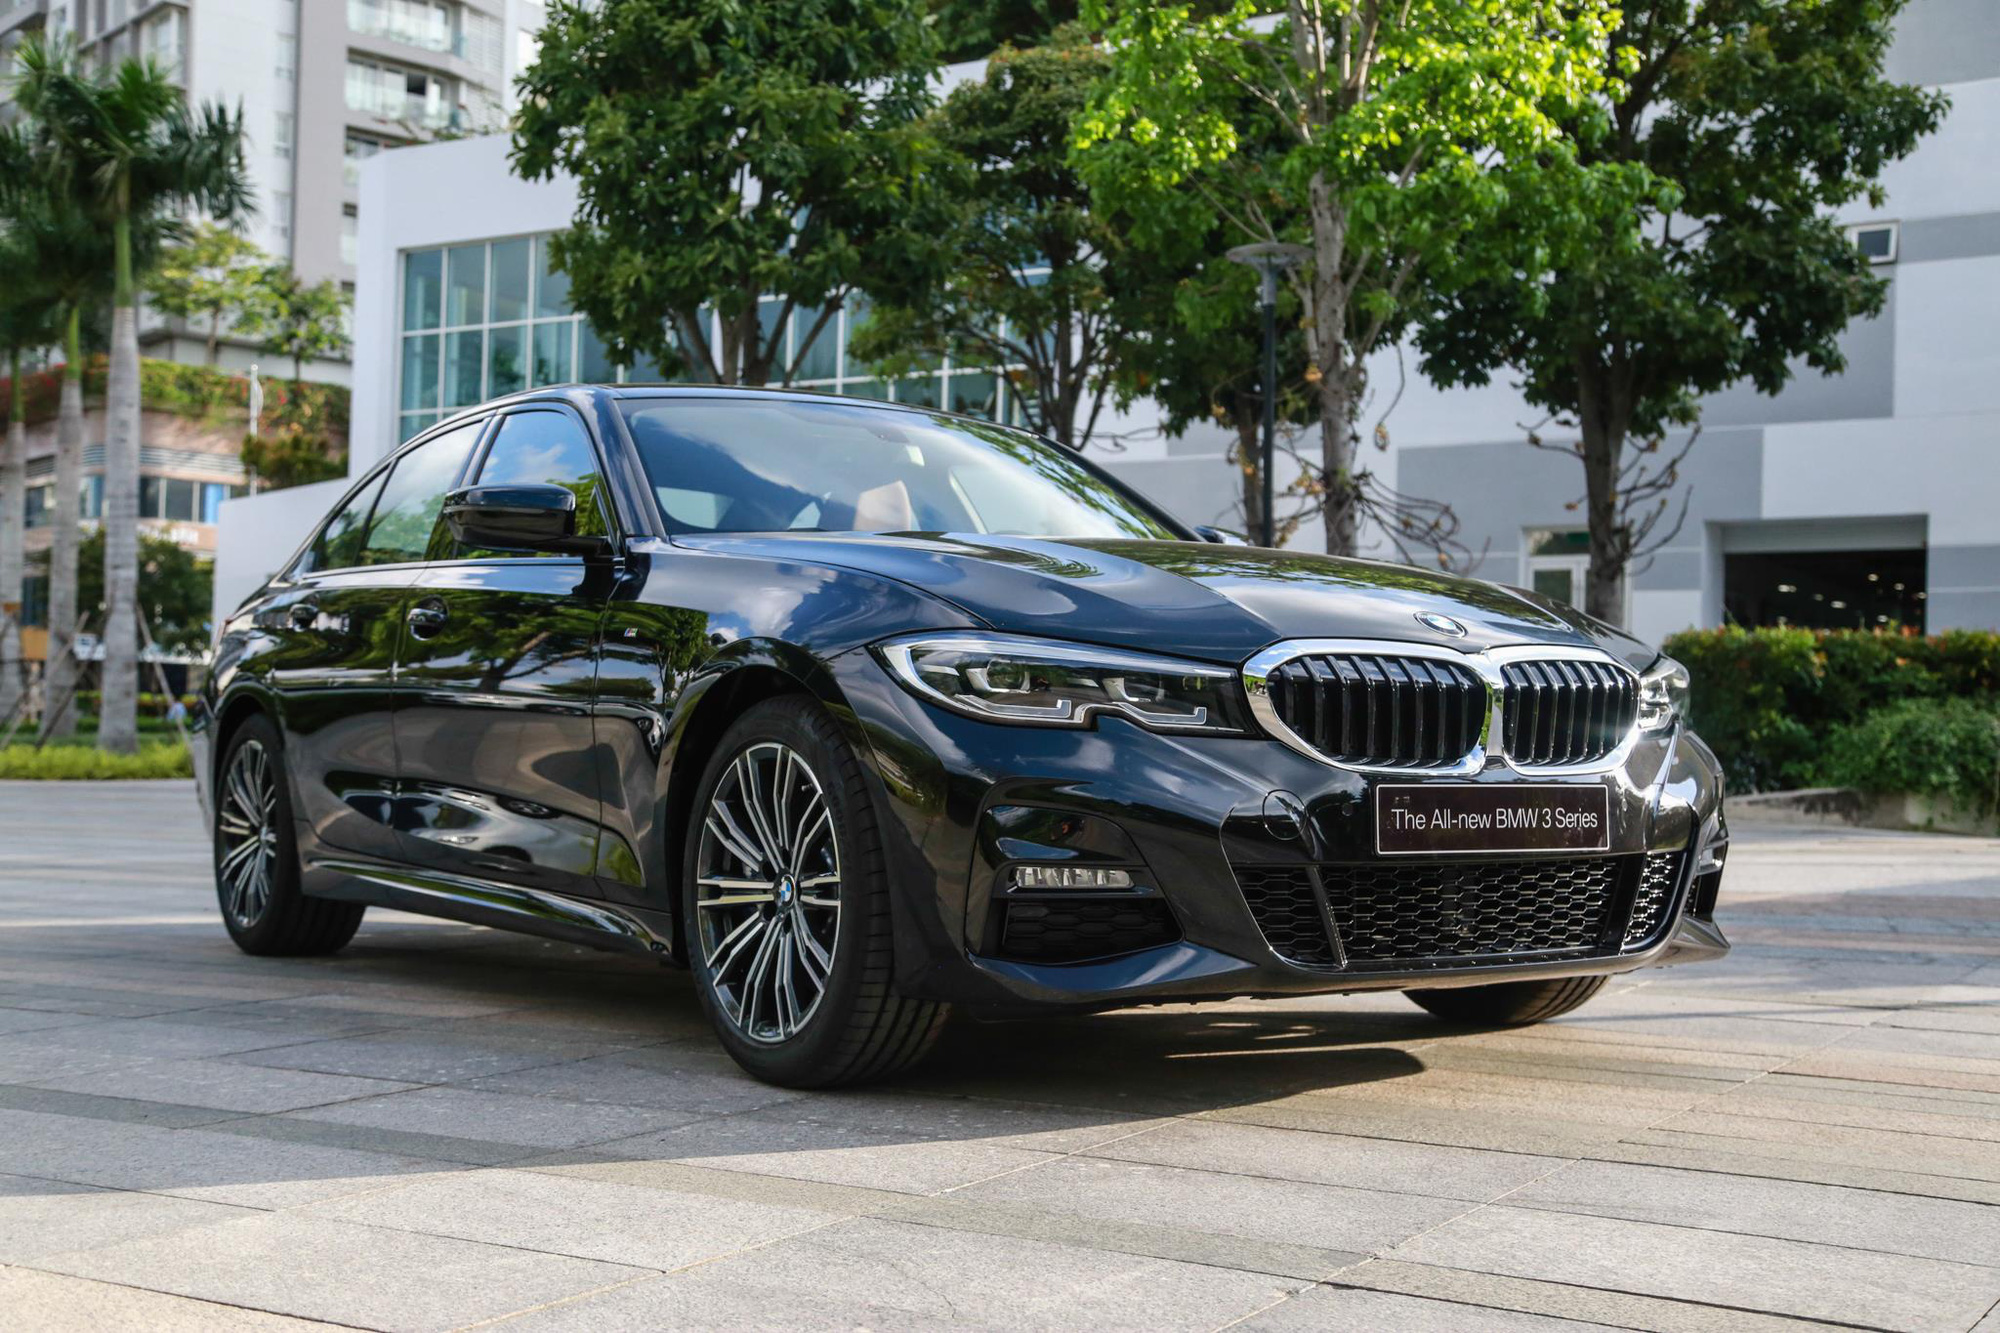 So sanh BMW 330i M Sport hay Mercedes-AMG A 35 4Matic anh 2